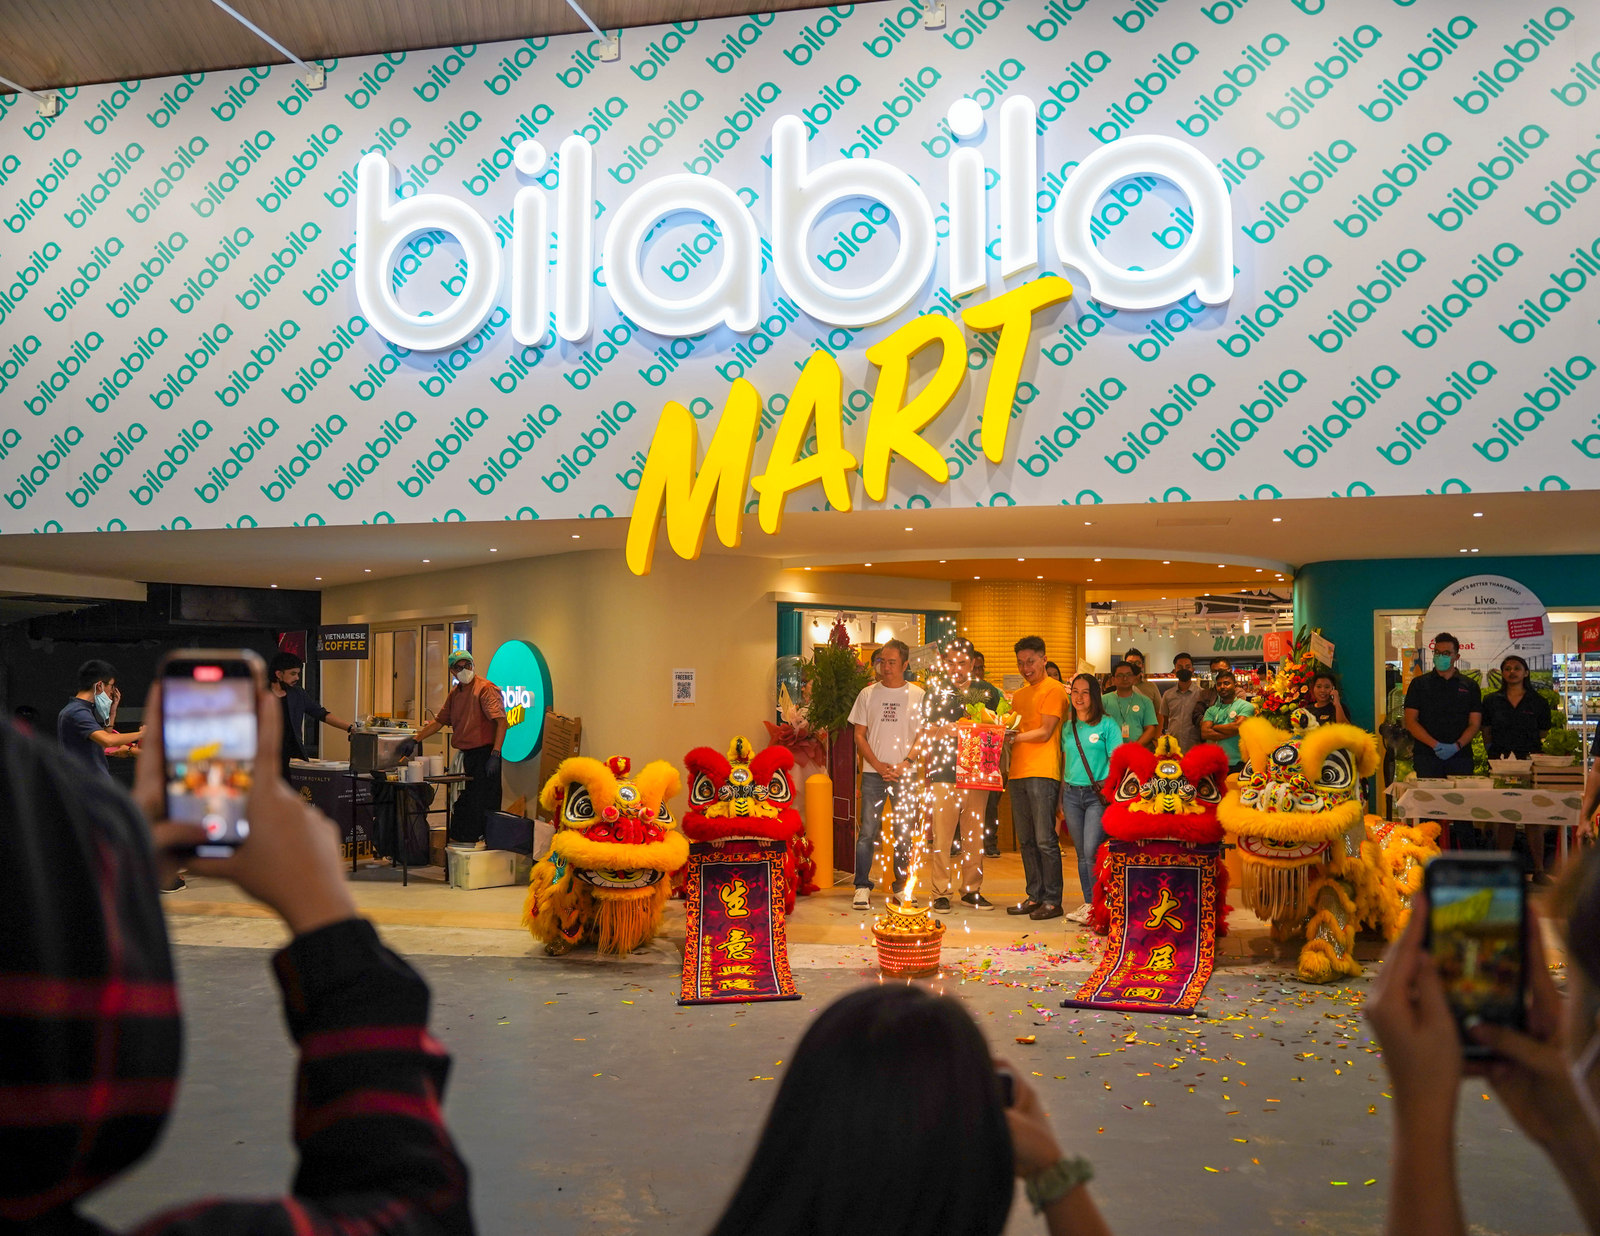 BilaBila Mart: Growing fast to serve grocery shoppers & support local producers in Malaysia